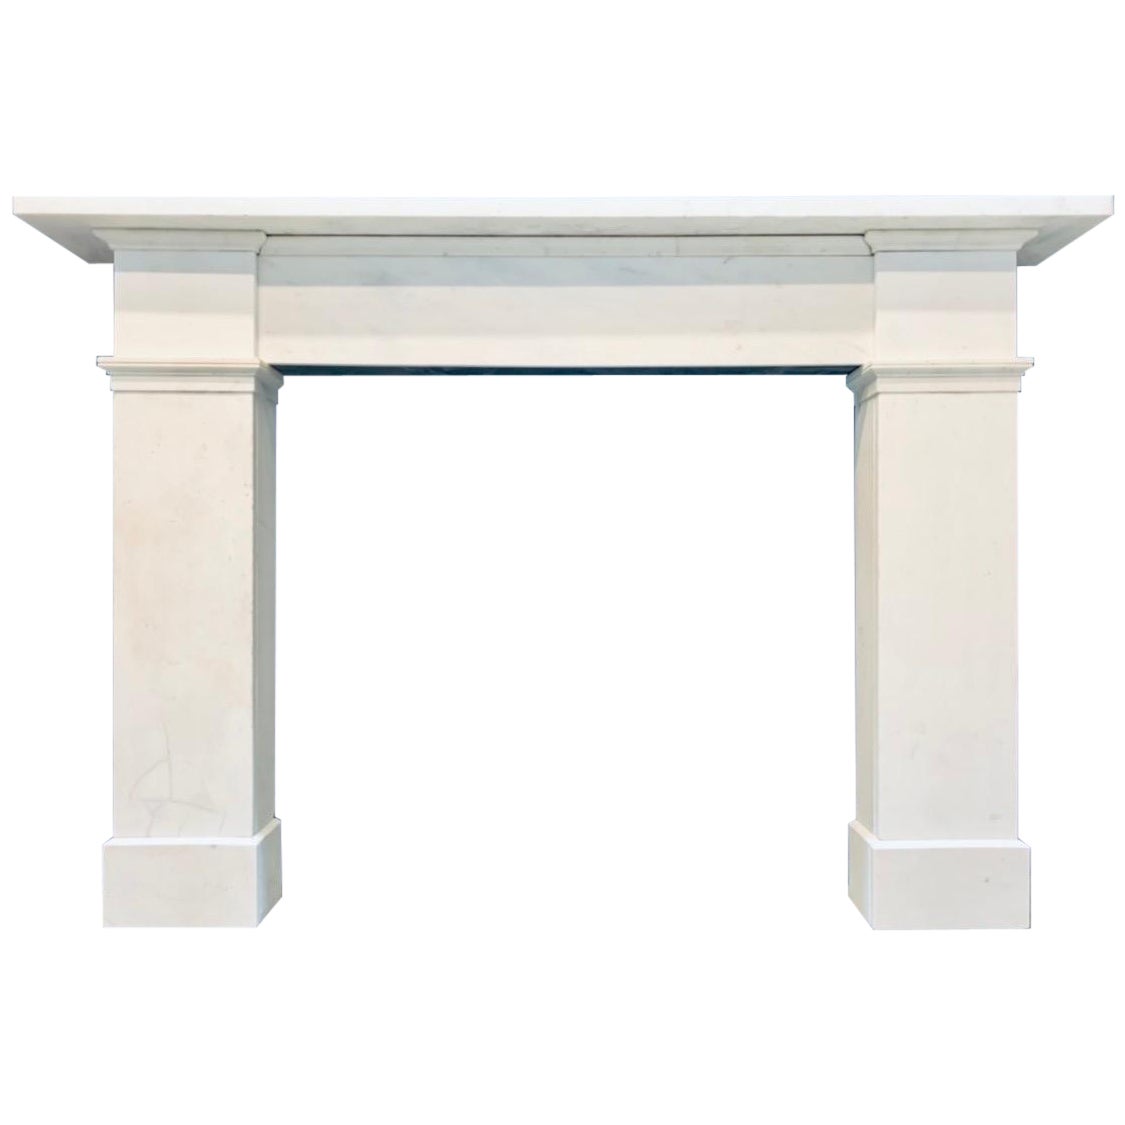 A Large Scottish Early 19th Century Georgian Statuary Marble Fireplace Surround. For Sale